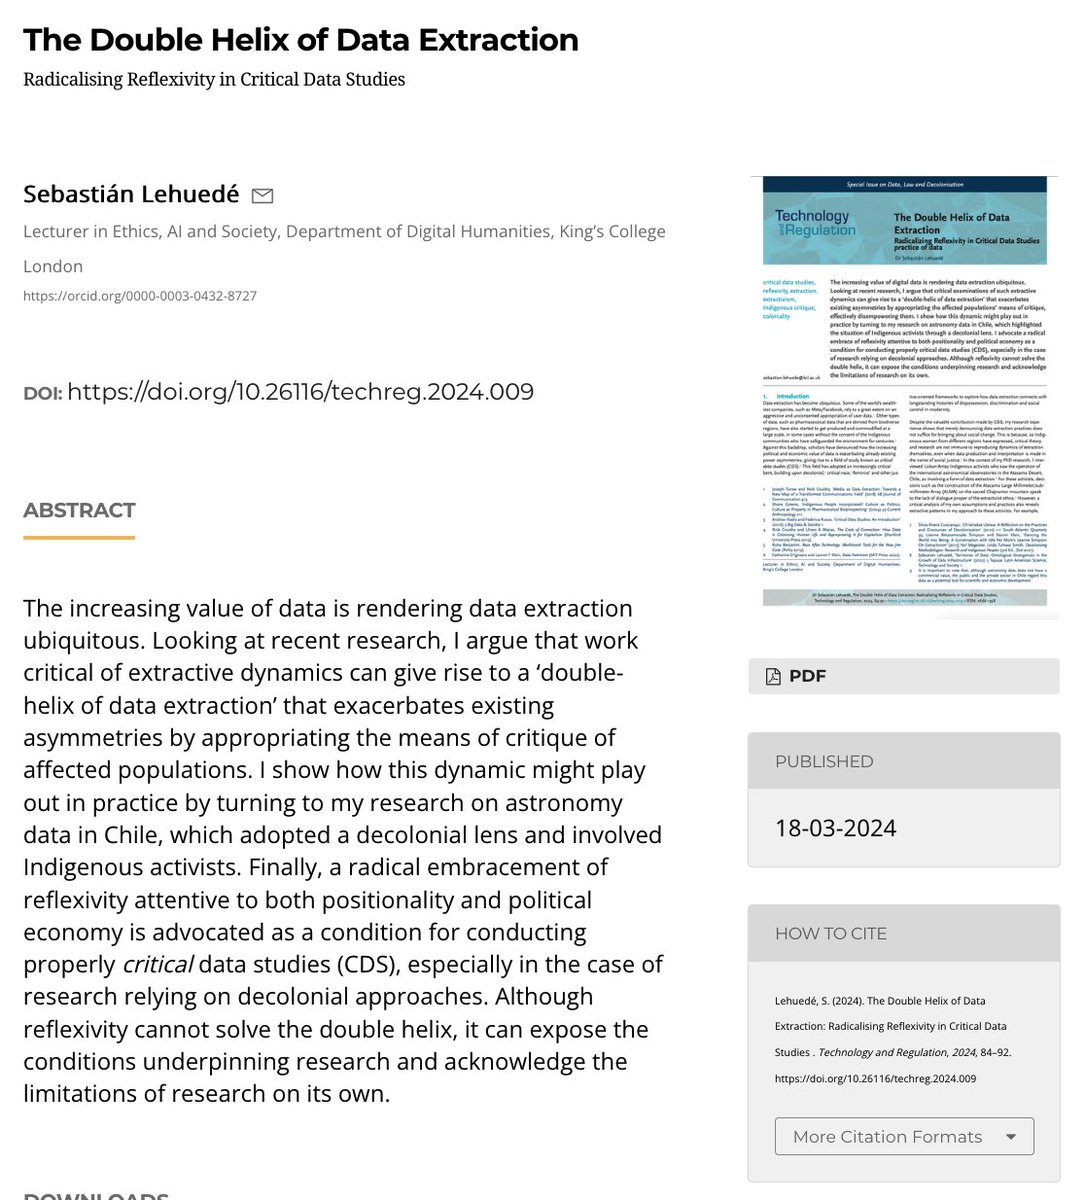 Very happy to be sharing this article on reflexivity in critical data studies. We criticise extraction, but what about our own practices? Crucial for decolonial frameworks techreg.org/article/view/1… Part of a wonderful special issue edited by @spdesouza, @MukiriSmith @linnetelwin.